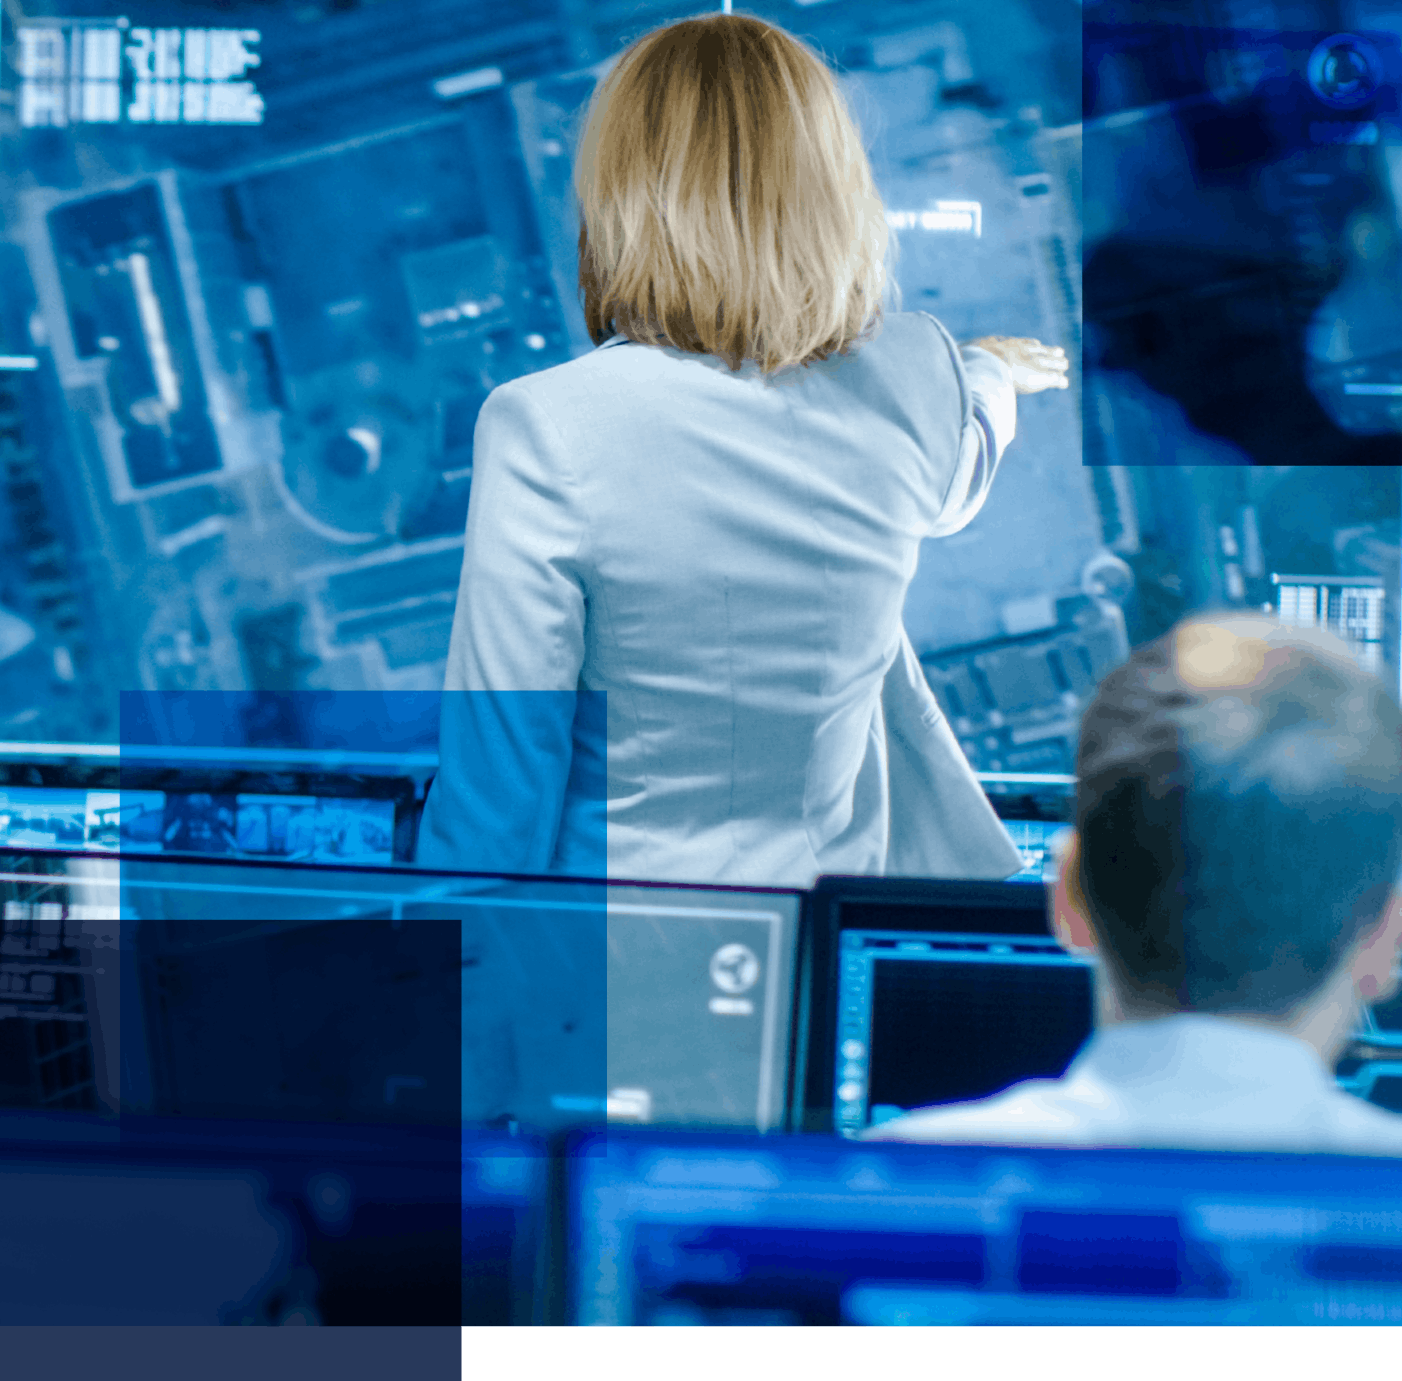 Image featuring a woman with her back to us, directing someone and standing among a bank of computers with a man in the fore ground looking at his computer screen. Related to: U.S. Special Operations Command (SOCOM), full digital support services, socom infrastructure modernization, agile cloud operating model, automated infrastructure, dynamic information network communications